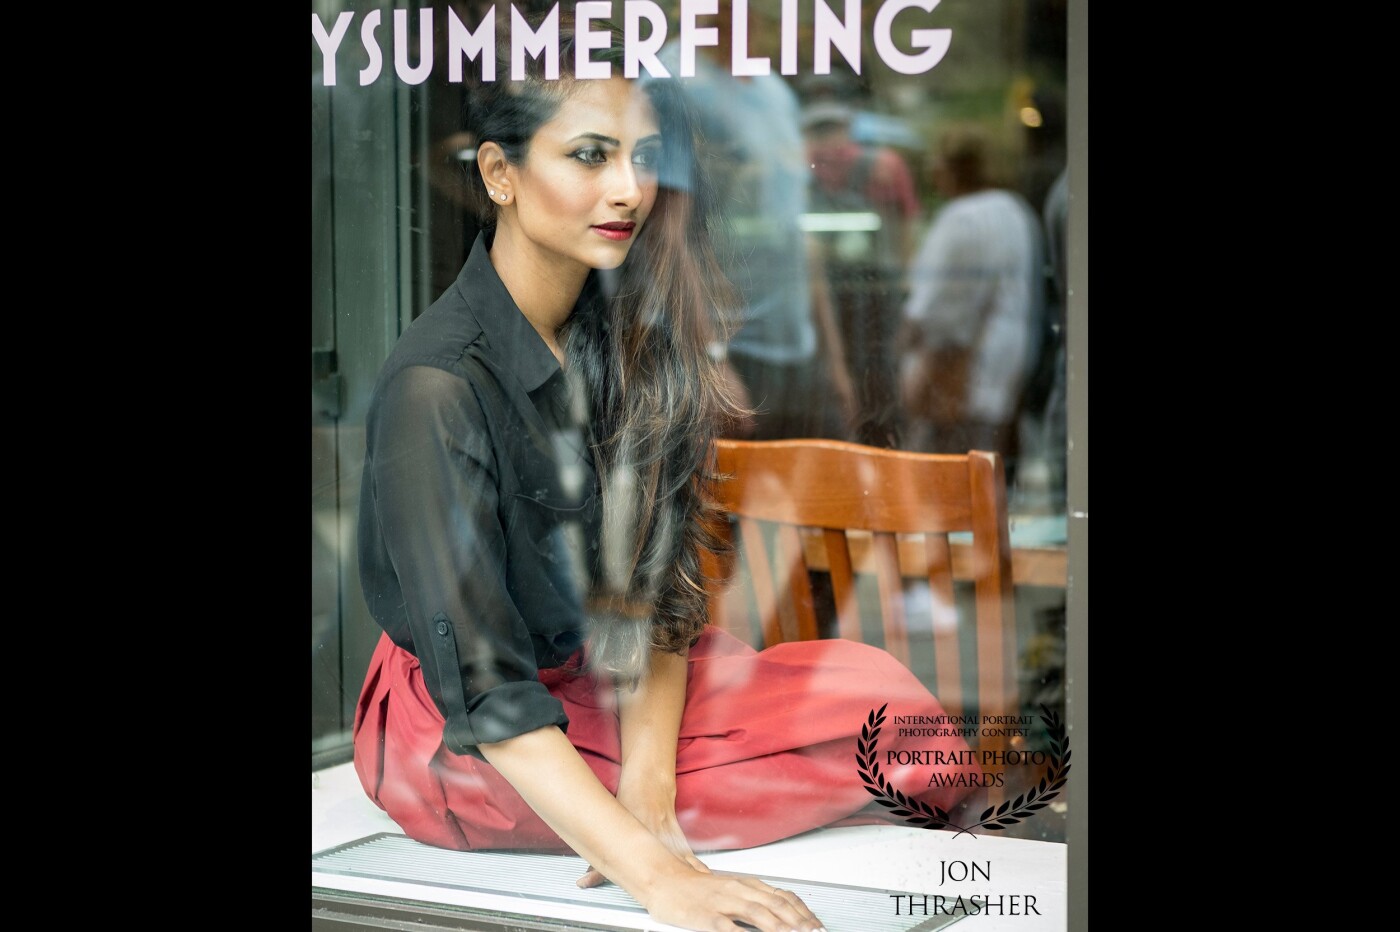 This was captured during a two-day shoot in NYC with LA-based model Nausheen Ahmed, in the Eataly location across from the Flat Iron Building. It was a sunny day and we had retreated to the cafe for a short rest and coffee when I decided to shoot Nausheen through the front window. The challenge was capturing her without too much "interference" from the constant foot traffic in and out of the cafe. I think we succeeded. You can find Nausheen on Instagram at @nausheen_ahmed